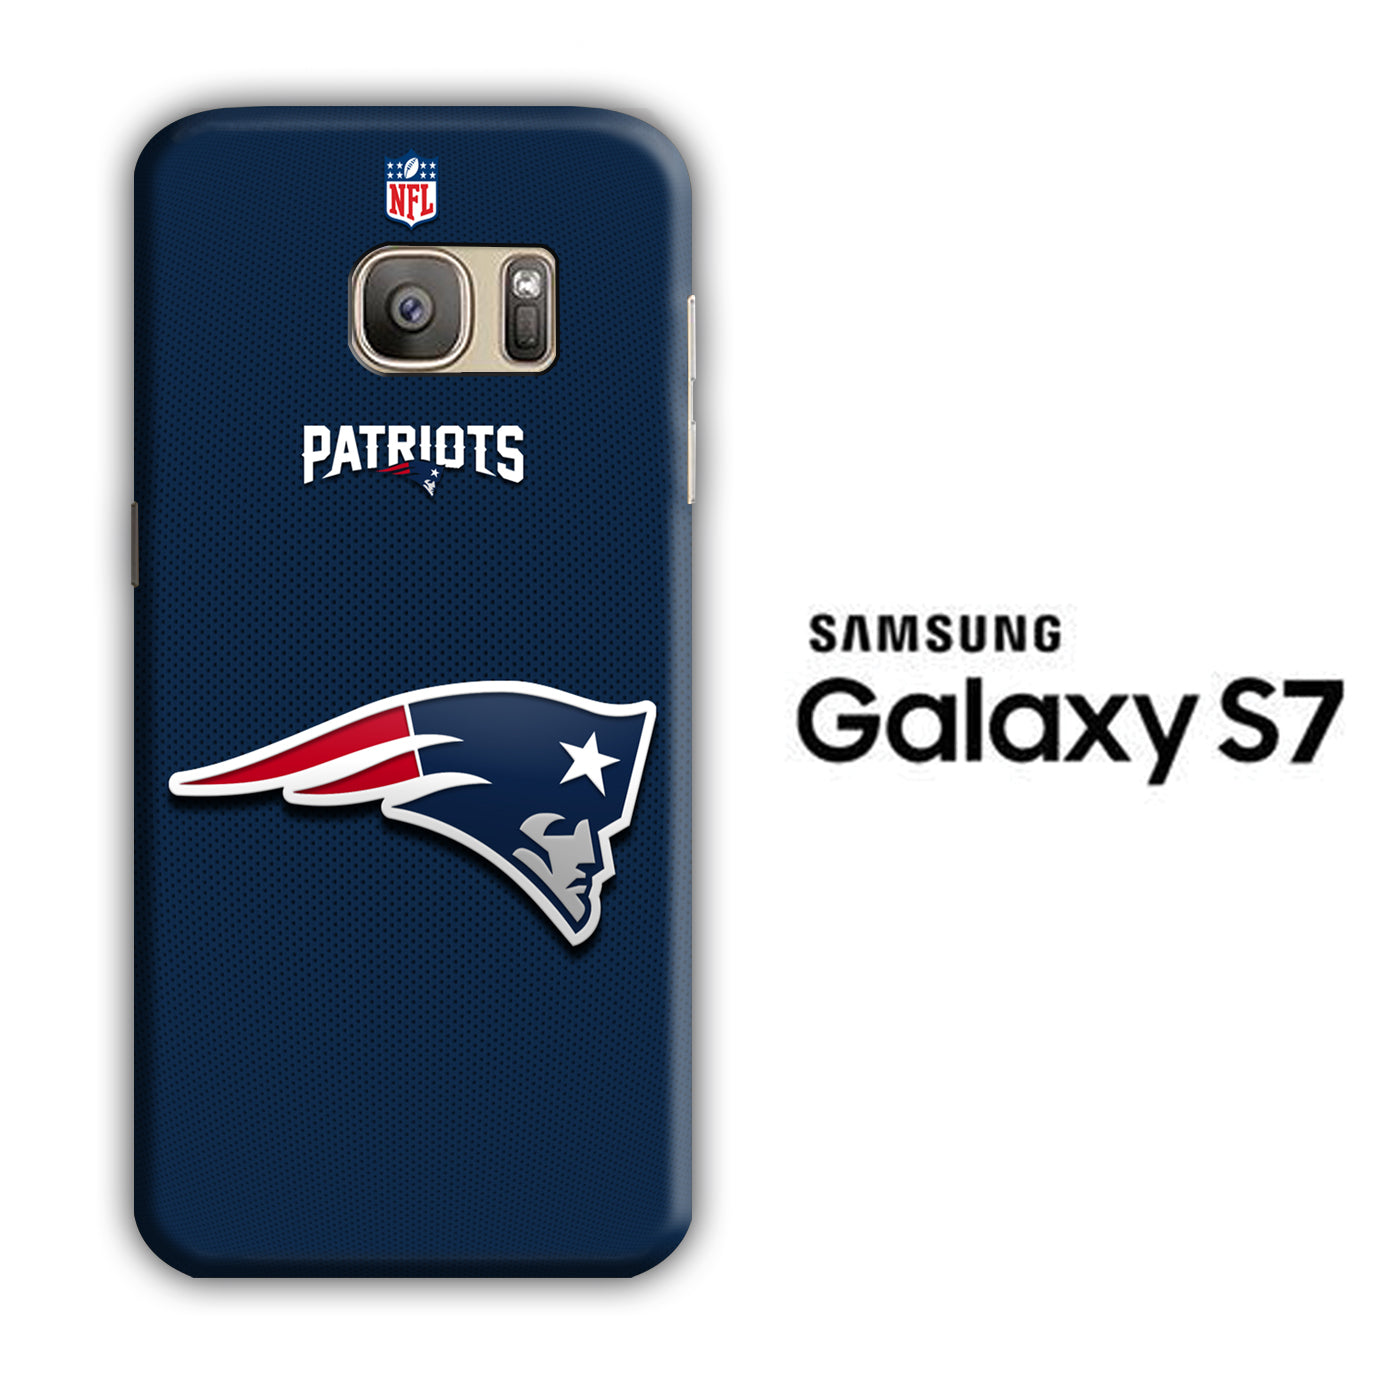 NFL New England Patriots 001 Samsung Galaxy S7 3D Case - cleverny